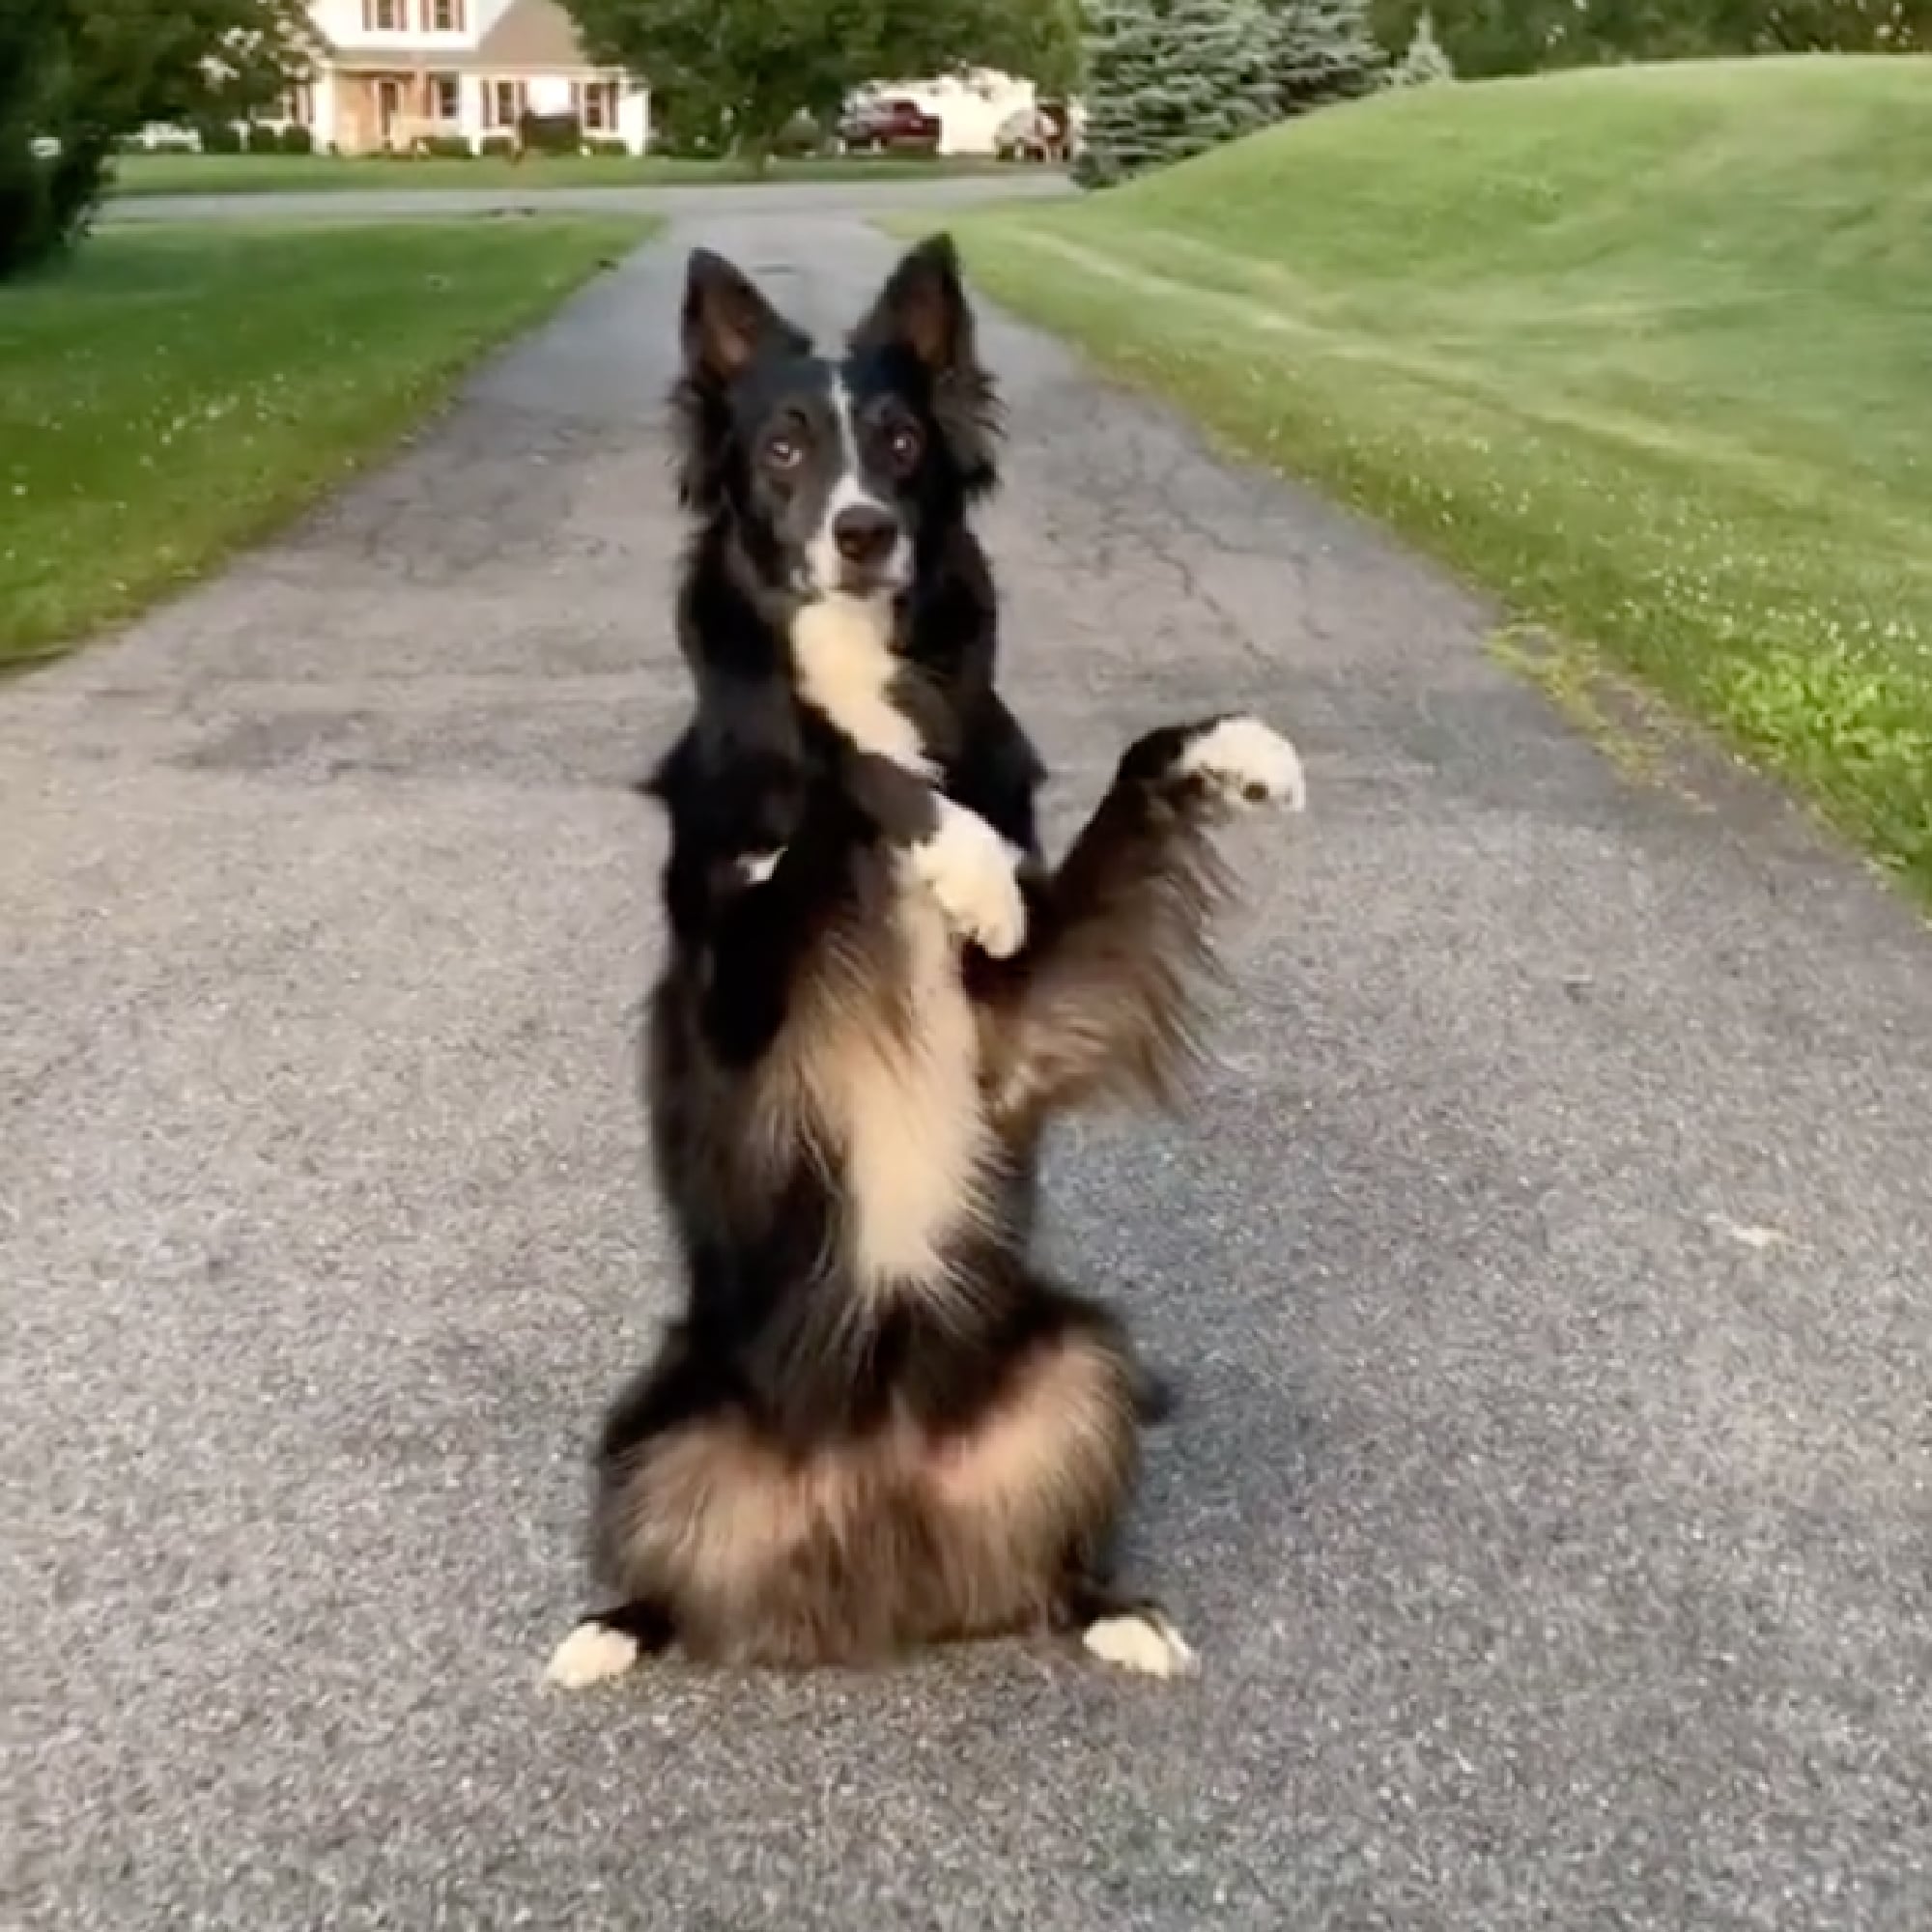 dog dancing to music in street